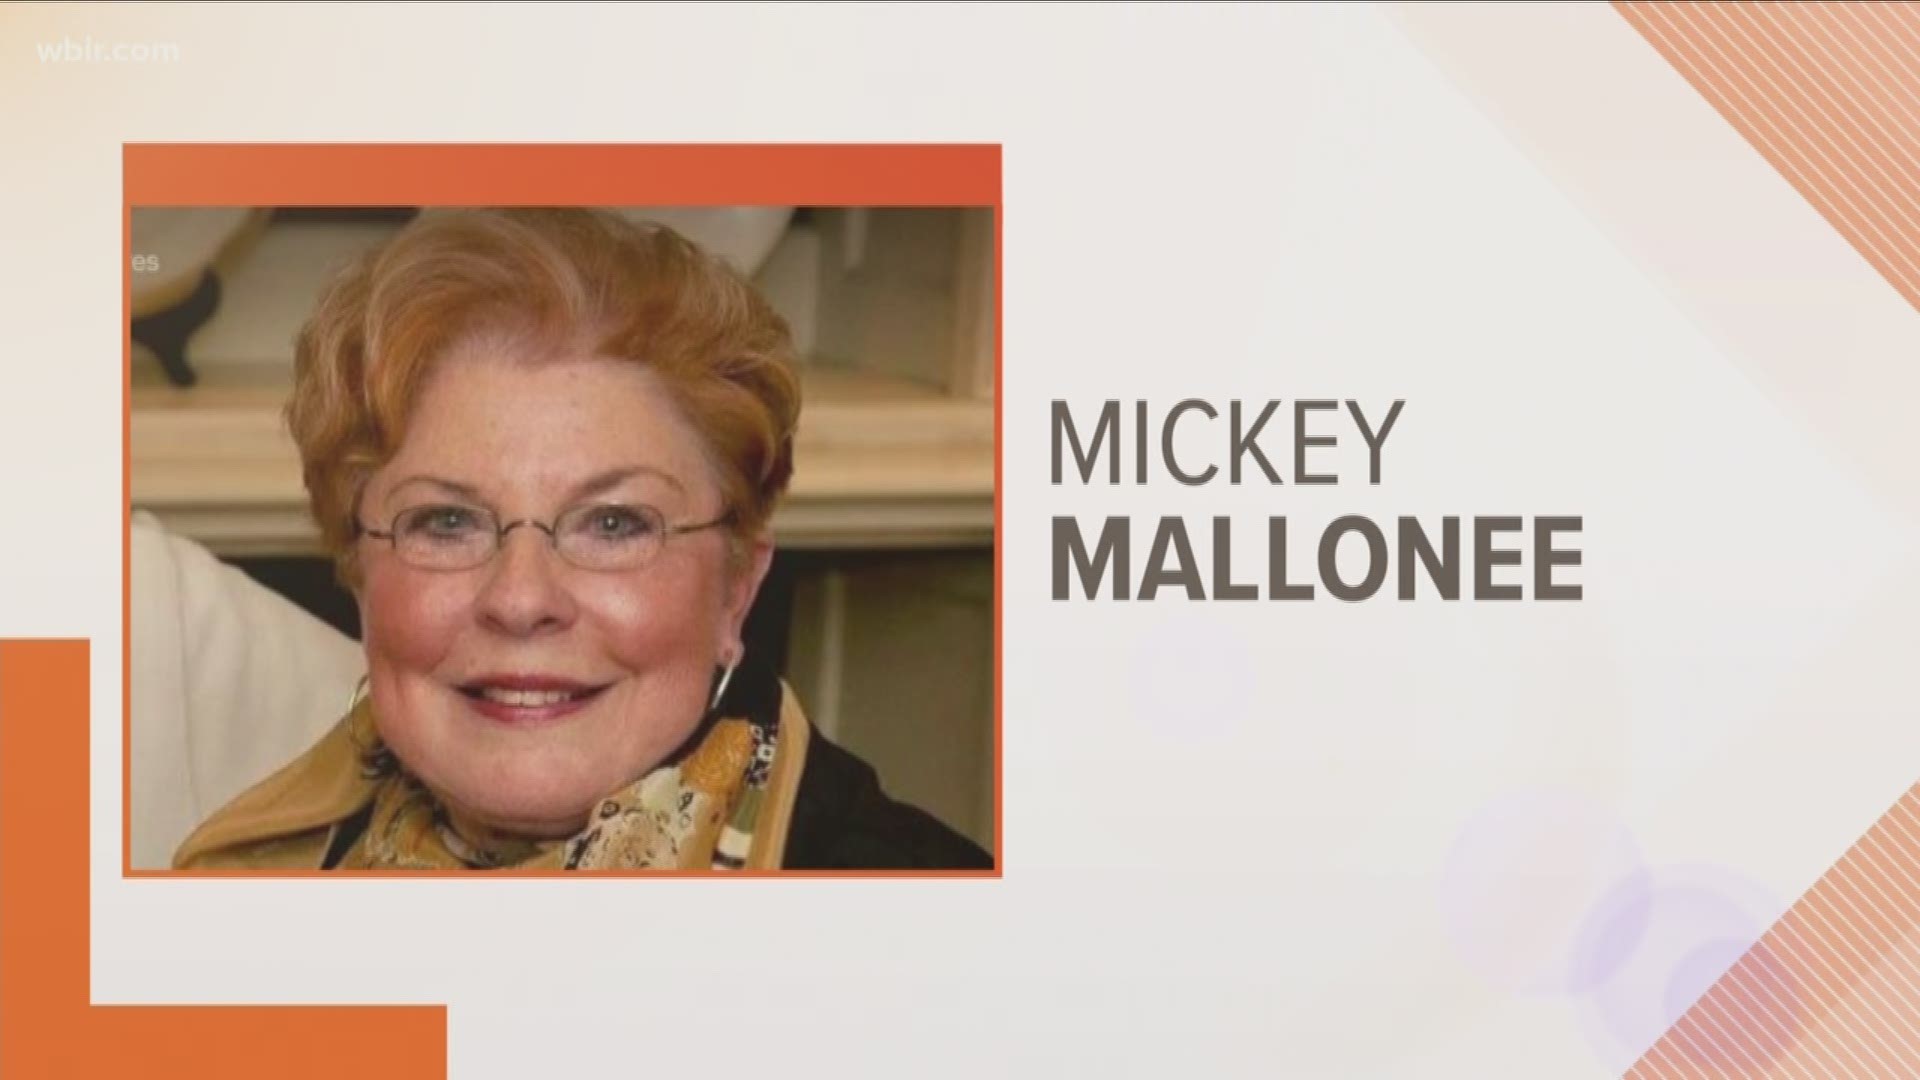 Friends are remembering former City of Knoxville events coordinator Mickey Mallonee today. Mallonee worked under several Knoxville mayors coordinating holiday celebrations.